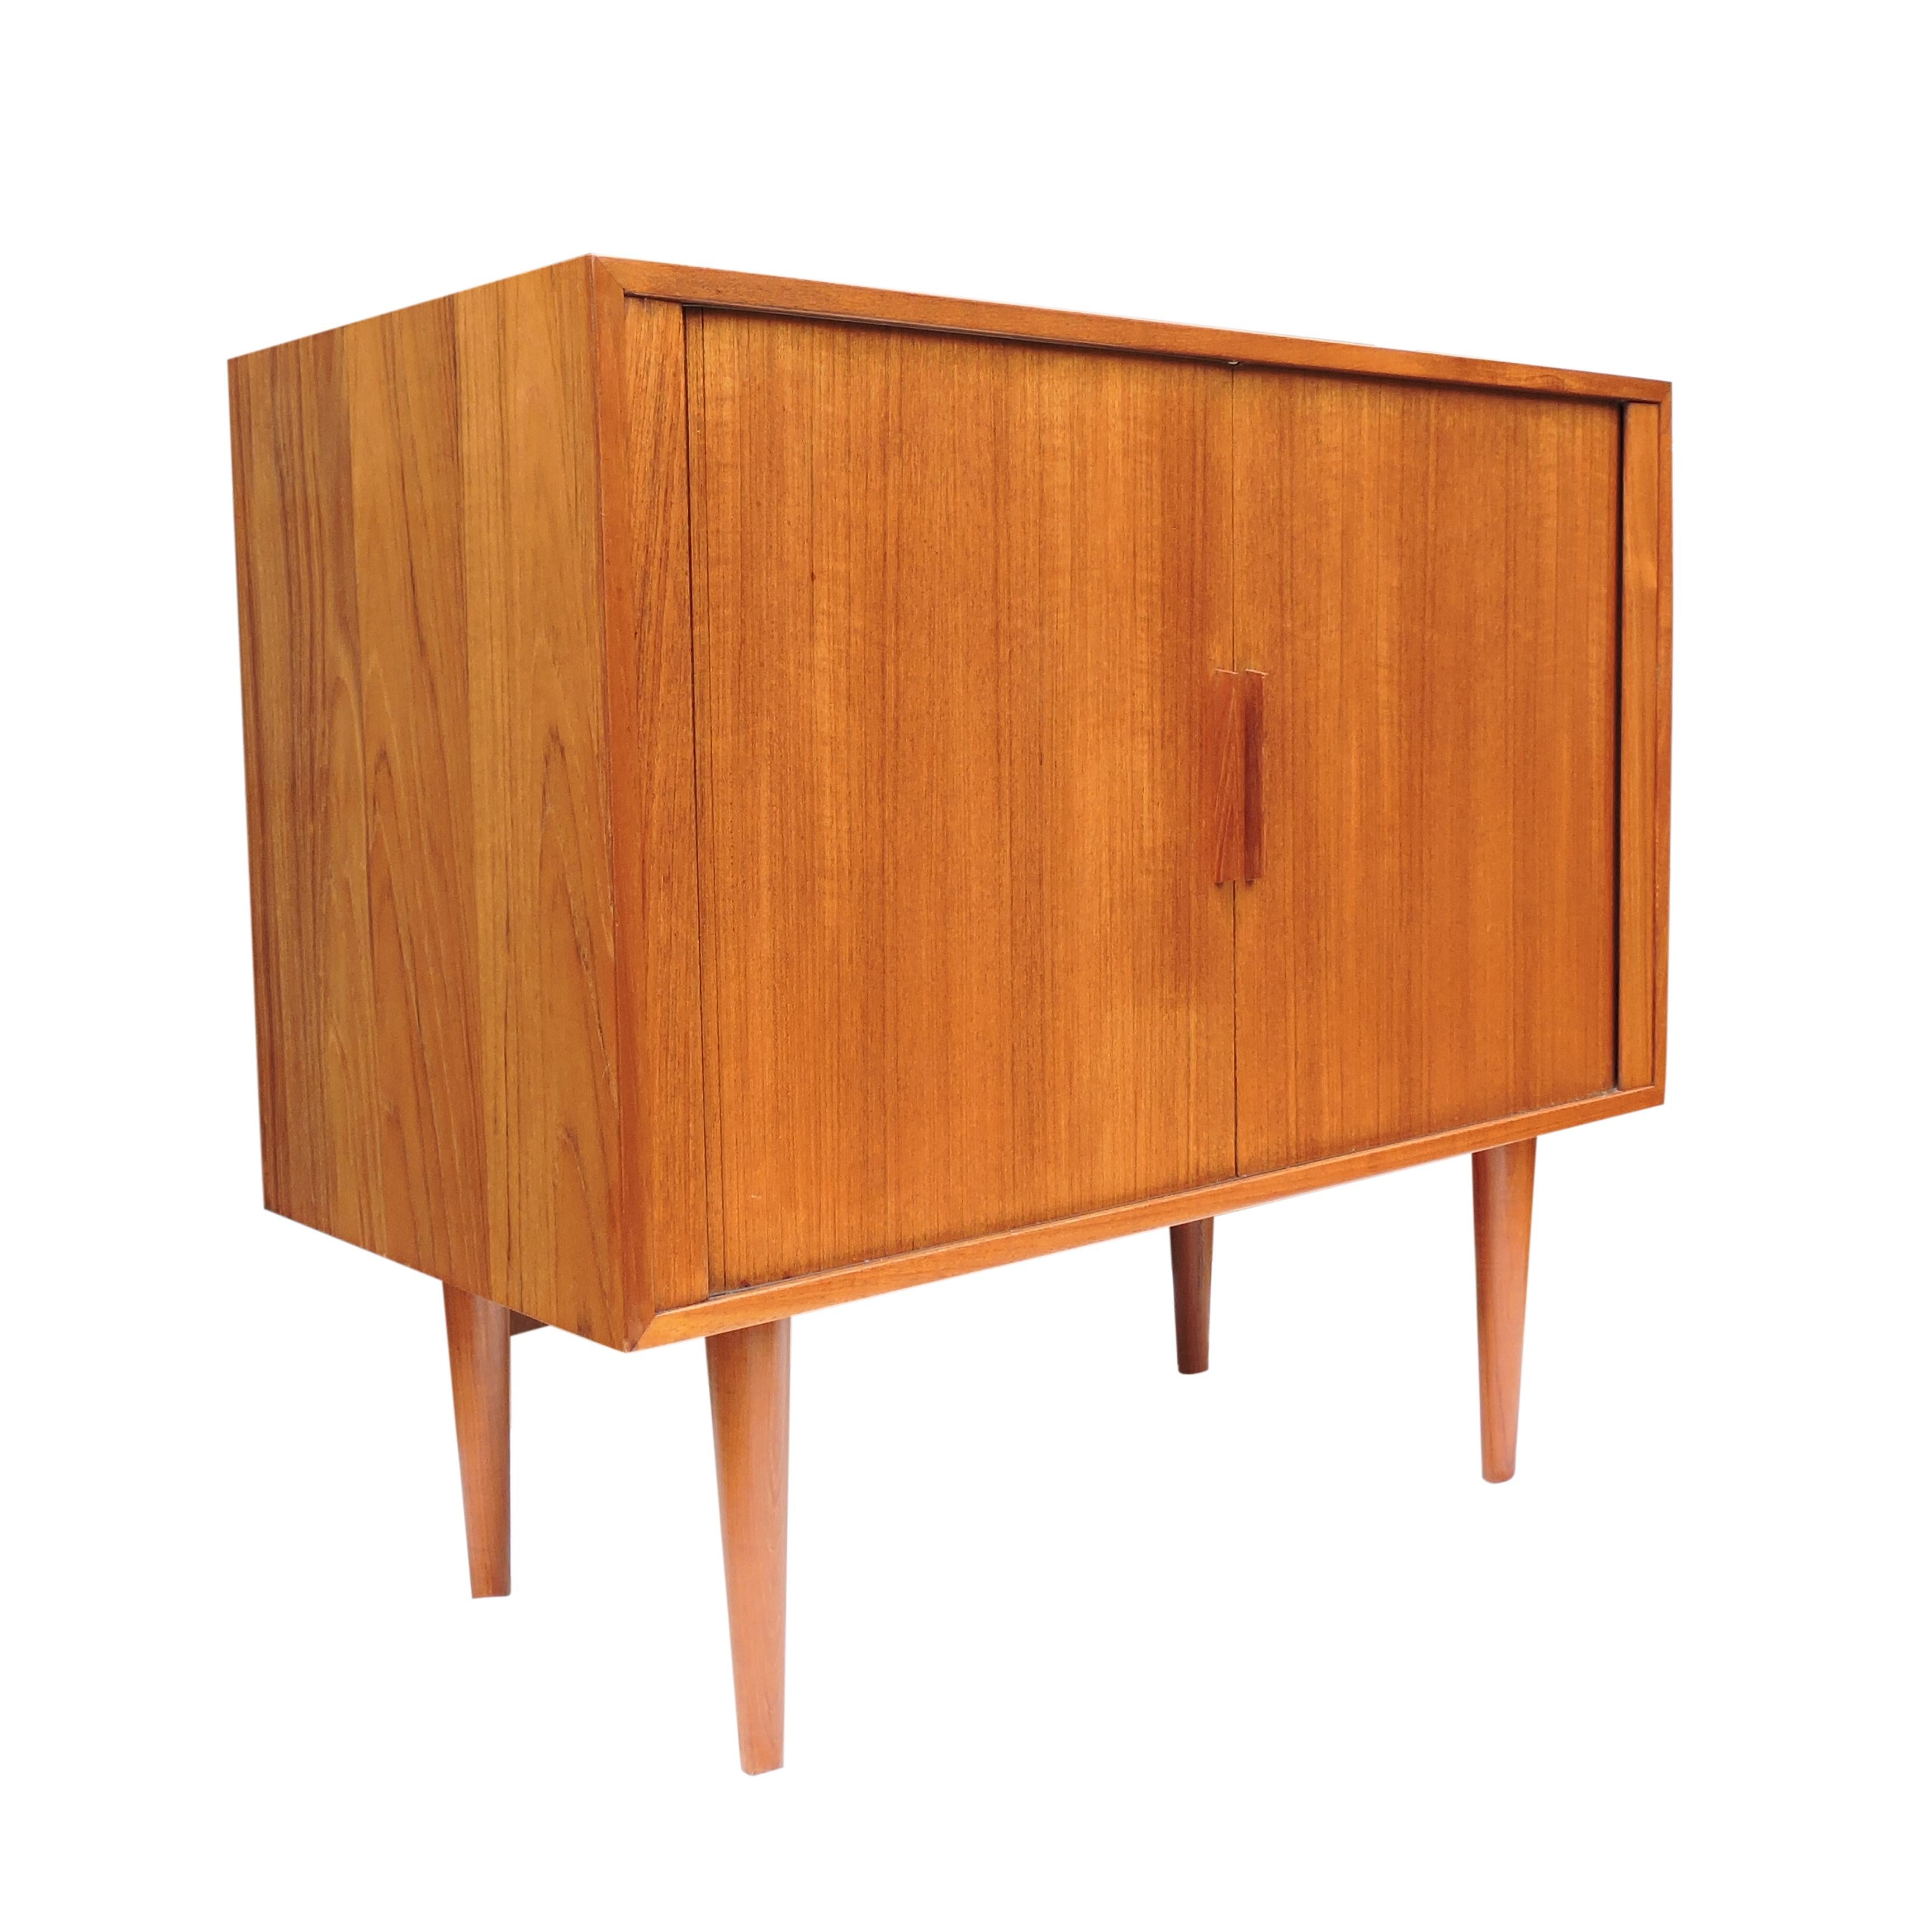 A teak tambour door record cabinet by Kai Kristiansen for Feldballes Mobelfabrik, Denmark, 1960s. There is divided space within, for records or books with two lower shelves.